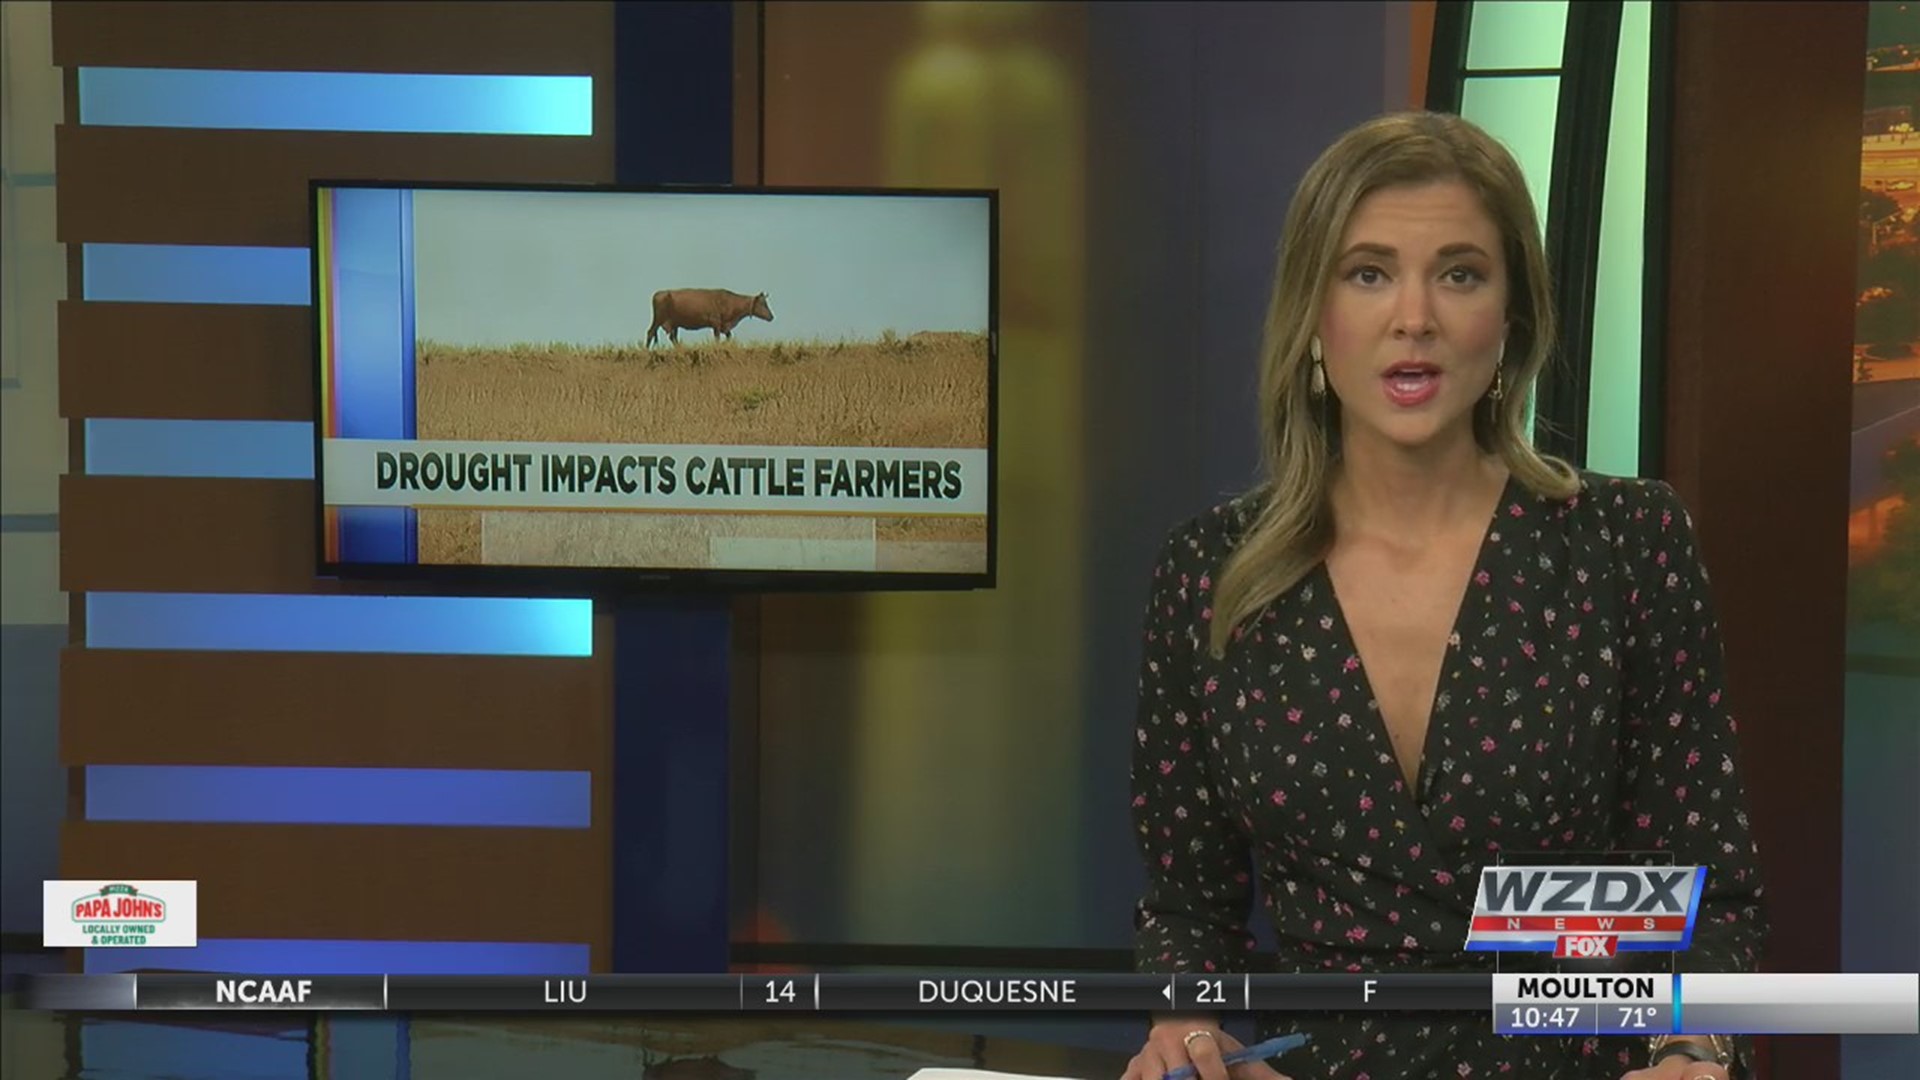 Alabama cattle farmers are feeling the pinch from the worsening drought.